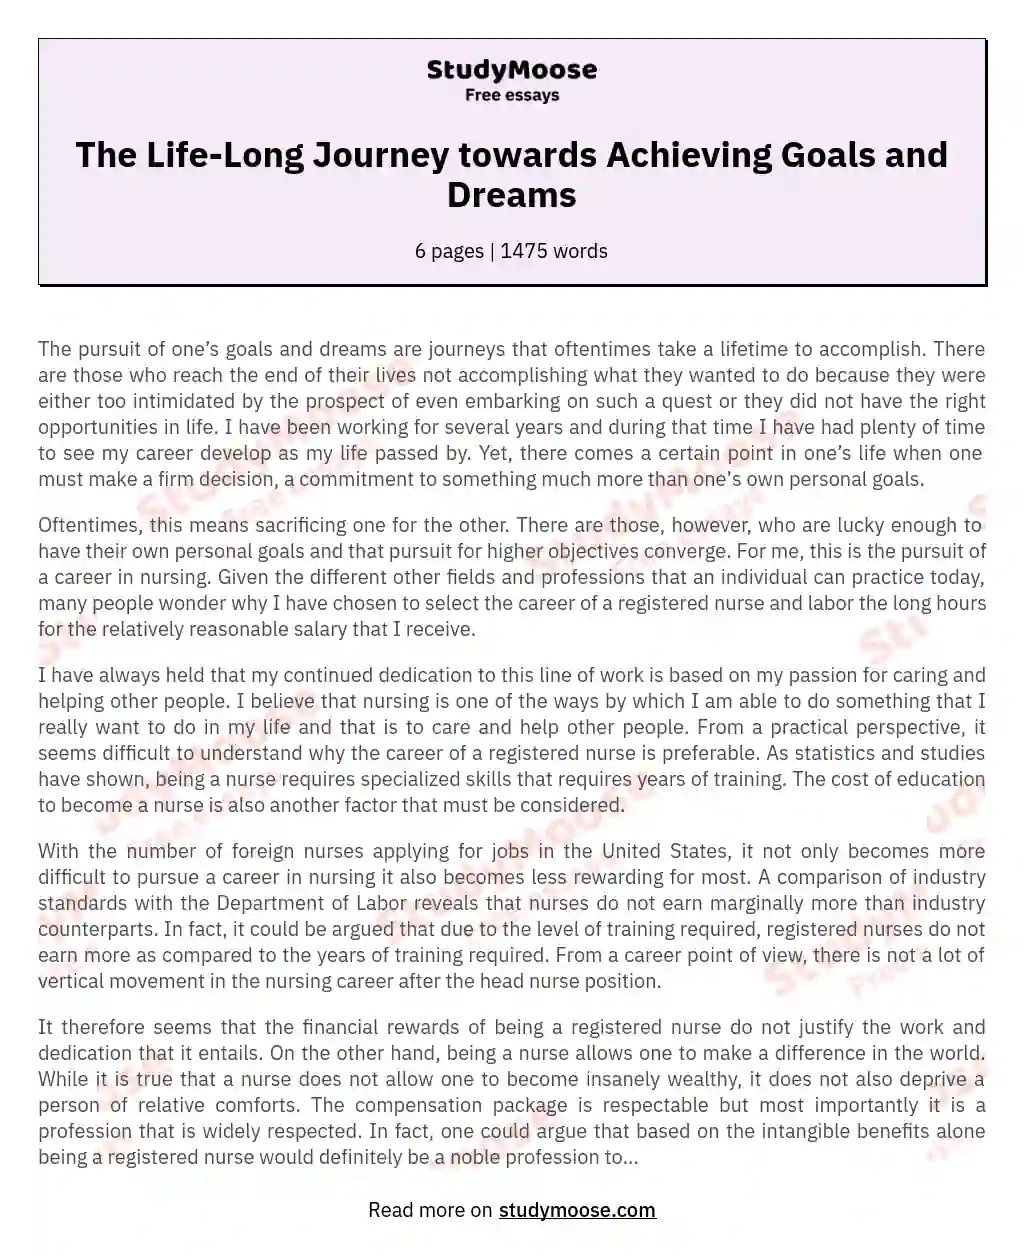 The Life-Long Journey towards Achieving Goals and Dreams essay